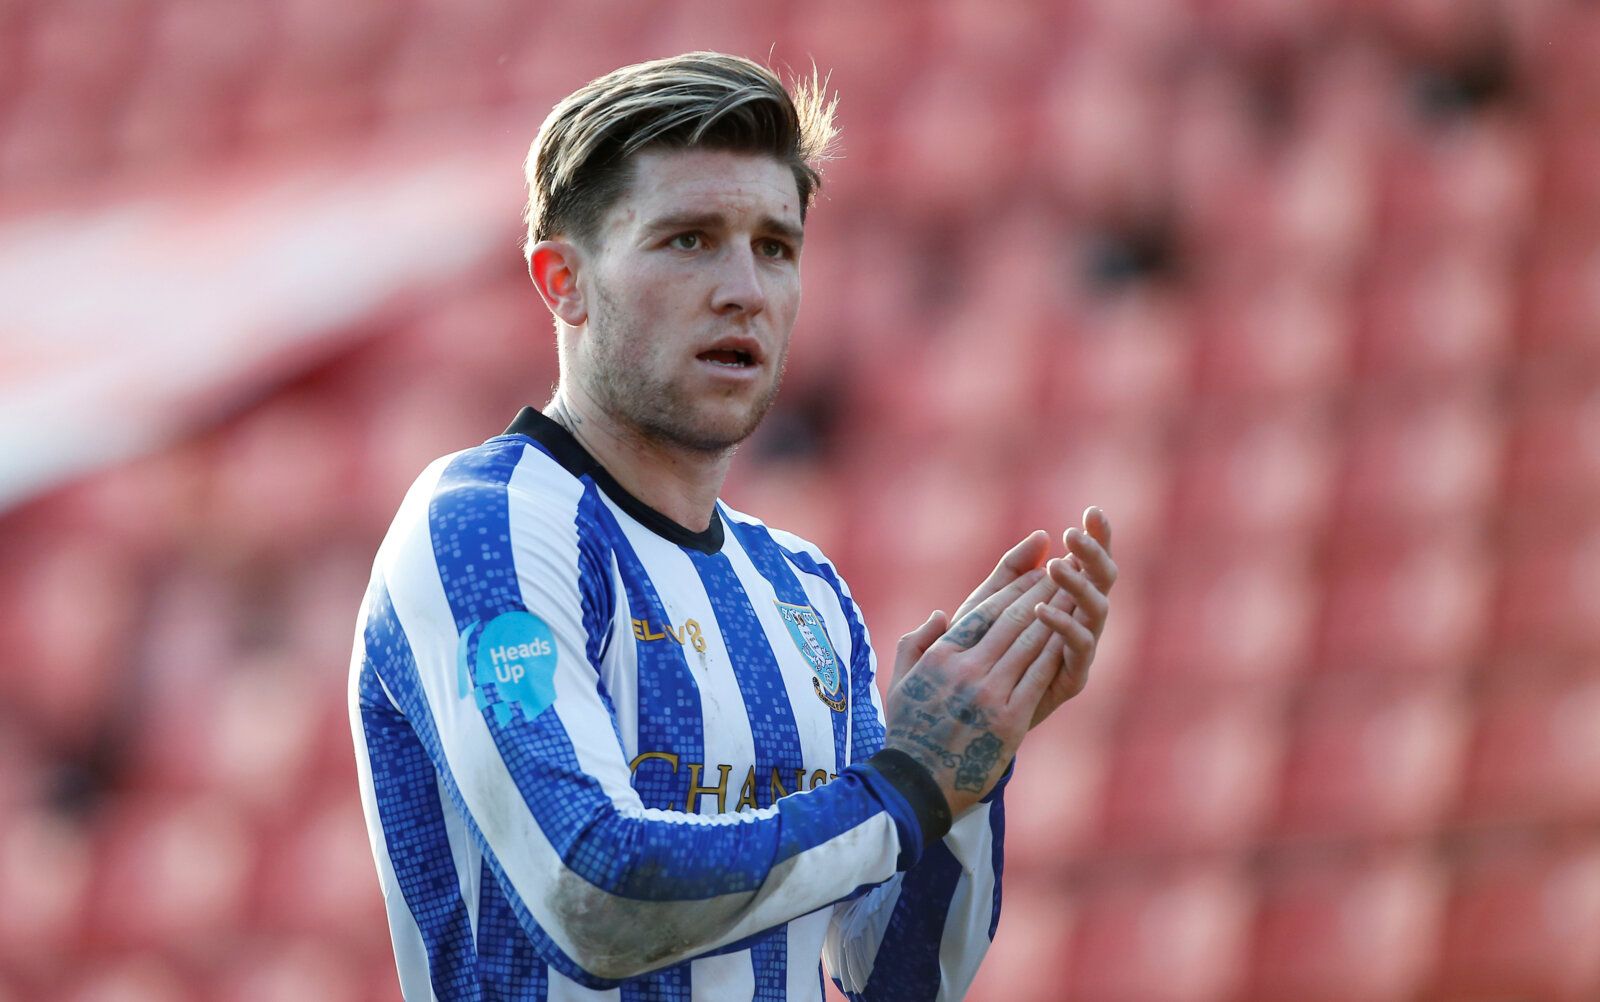 Soccer Football - Championship - Barnsley v Sheffield Wednesday - Oakwell, Barnsley, Britain - February 8, 2020  Sheffield Wednesday's Josh Windass applauds fans after the match  Action Images/Craig Brough  EDITORIAL USE ONLY. No use with unauthorized audio, video, data, fixture lists, club/league logos or 